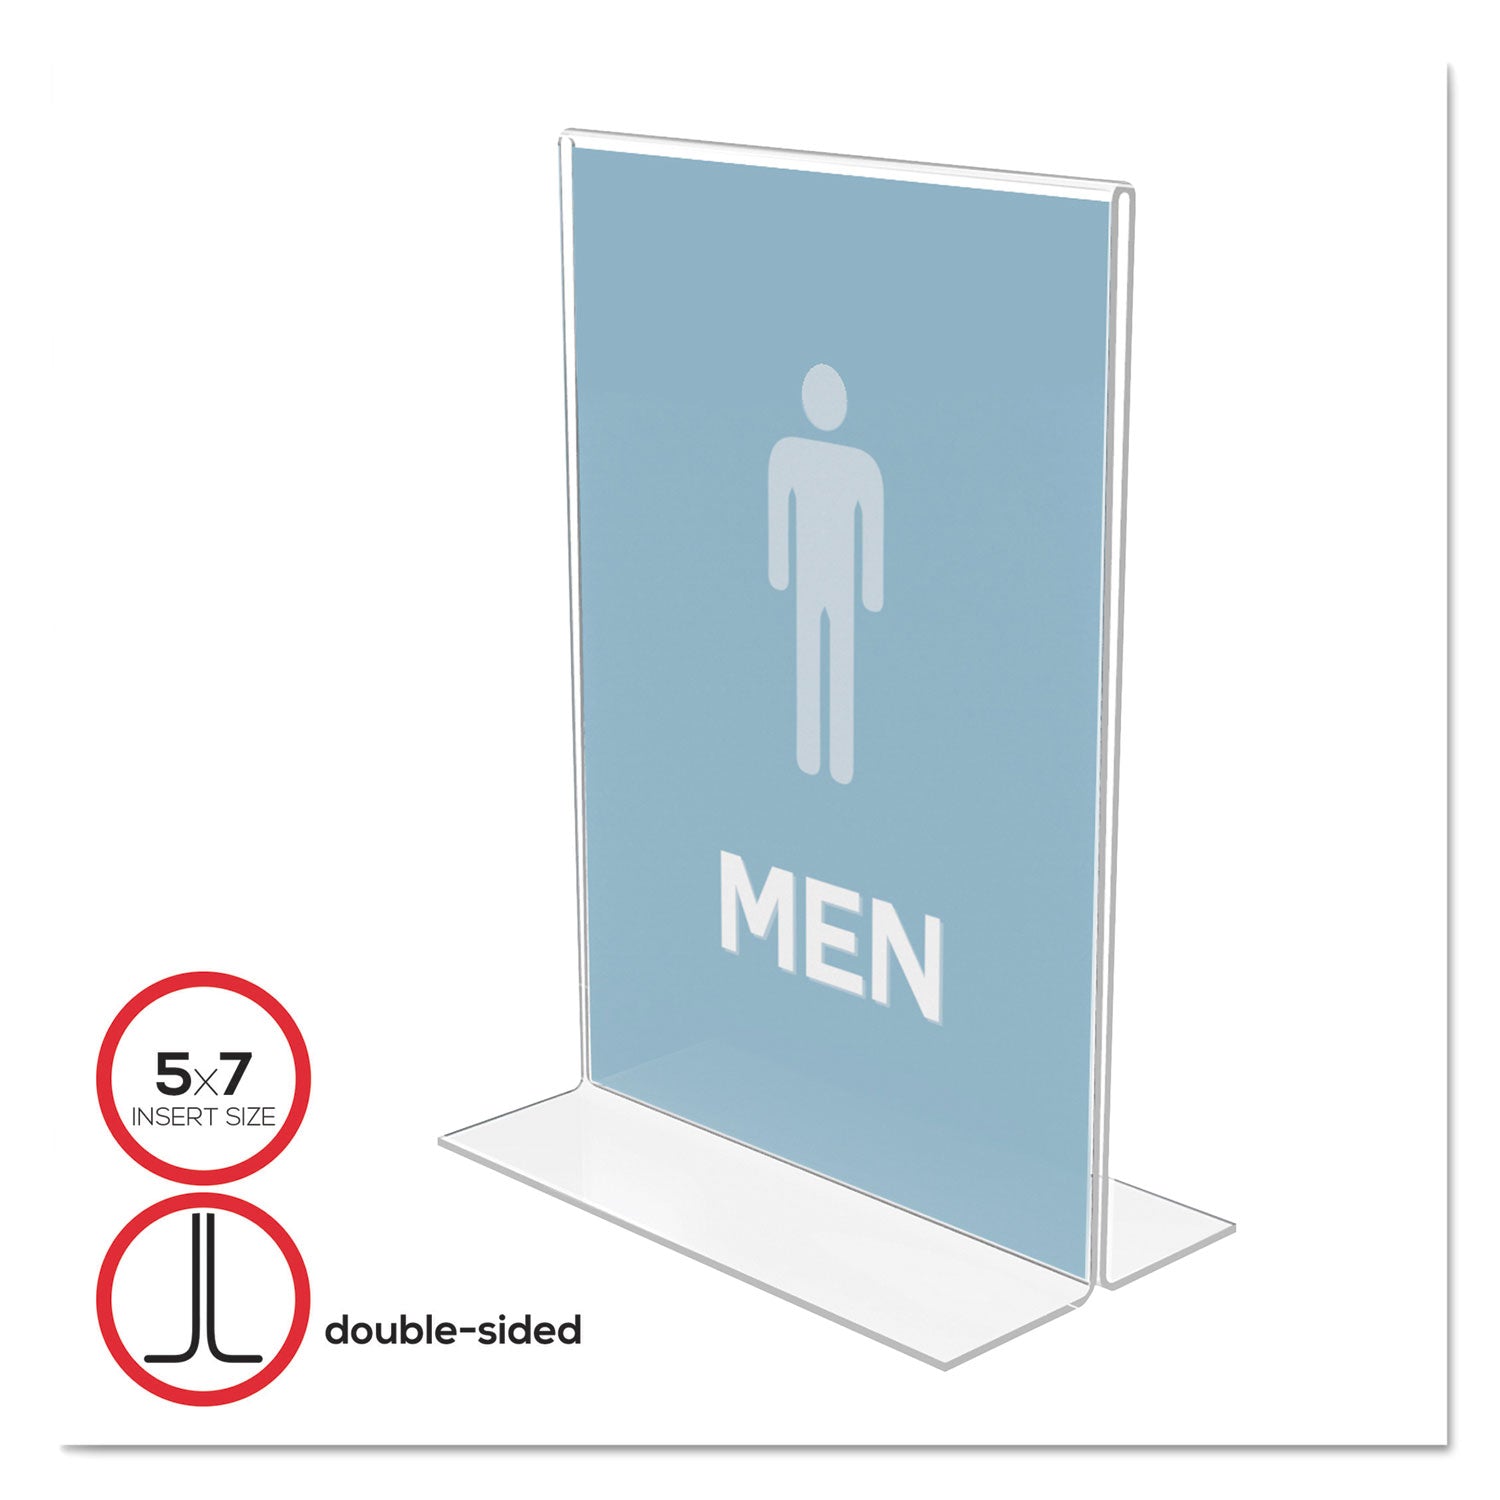 Classic Image Double-Sided Sign Holder, 5 x 7 Insert, Clear - 